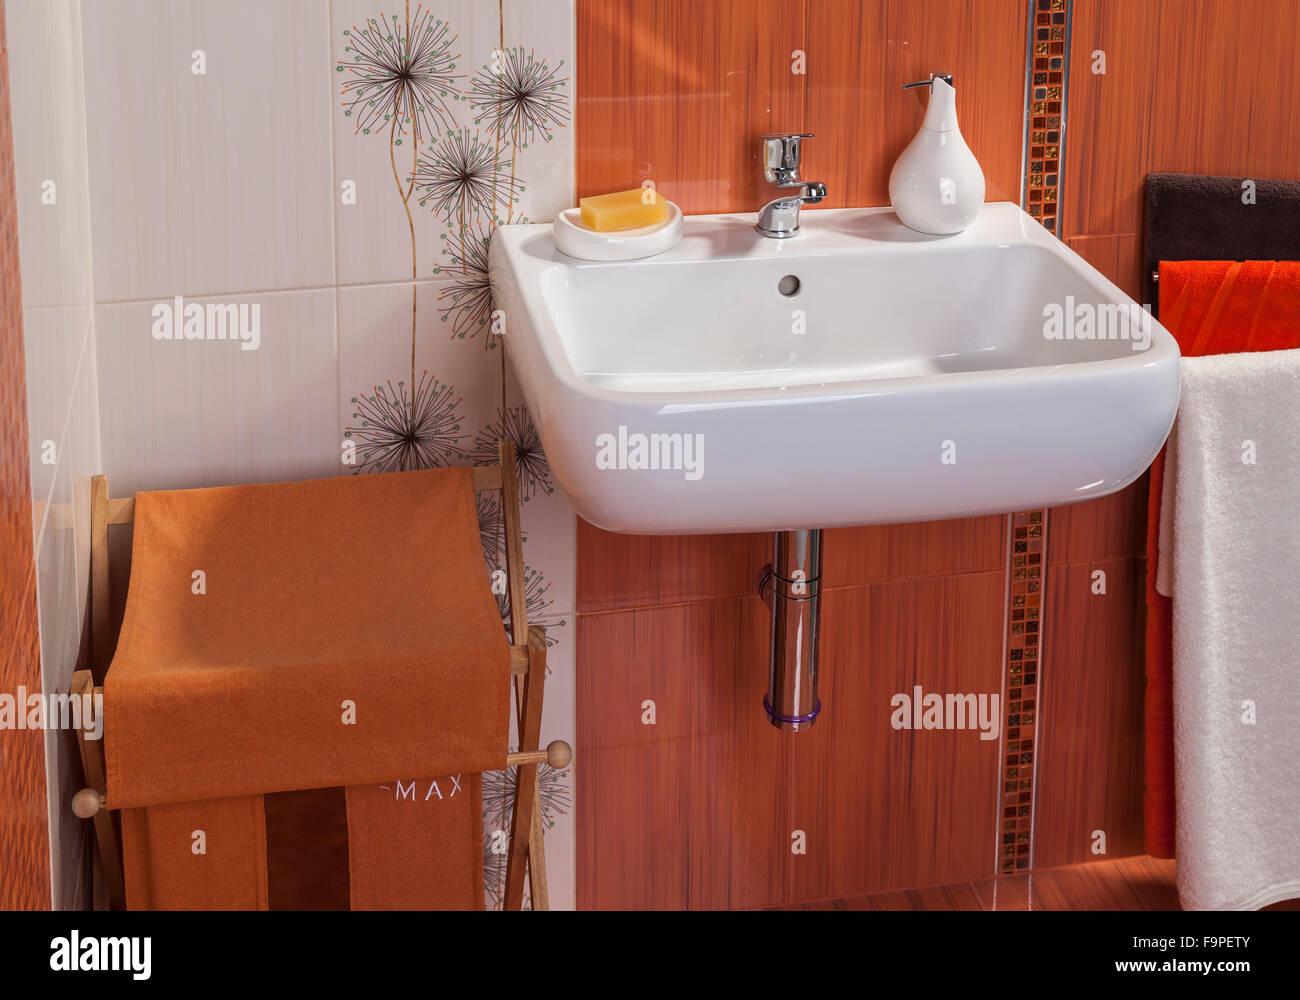 detail of modern private bathroom interior in orange with sink Stock Photo